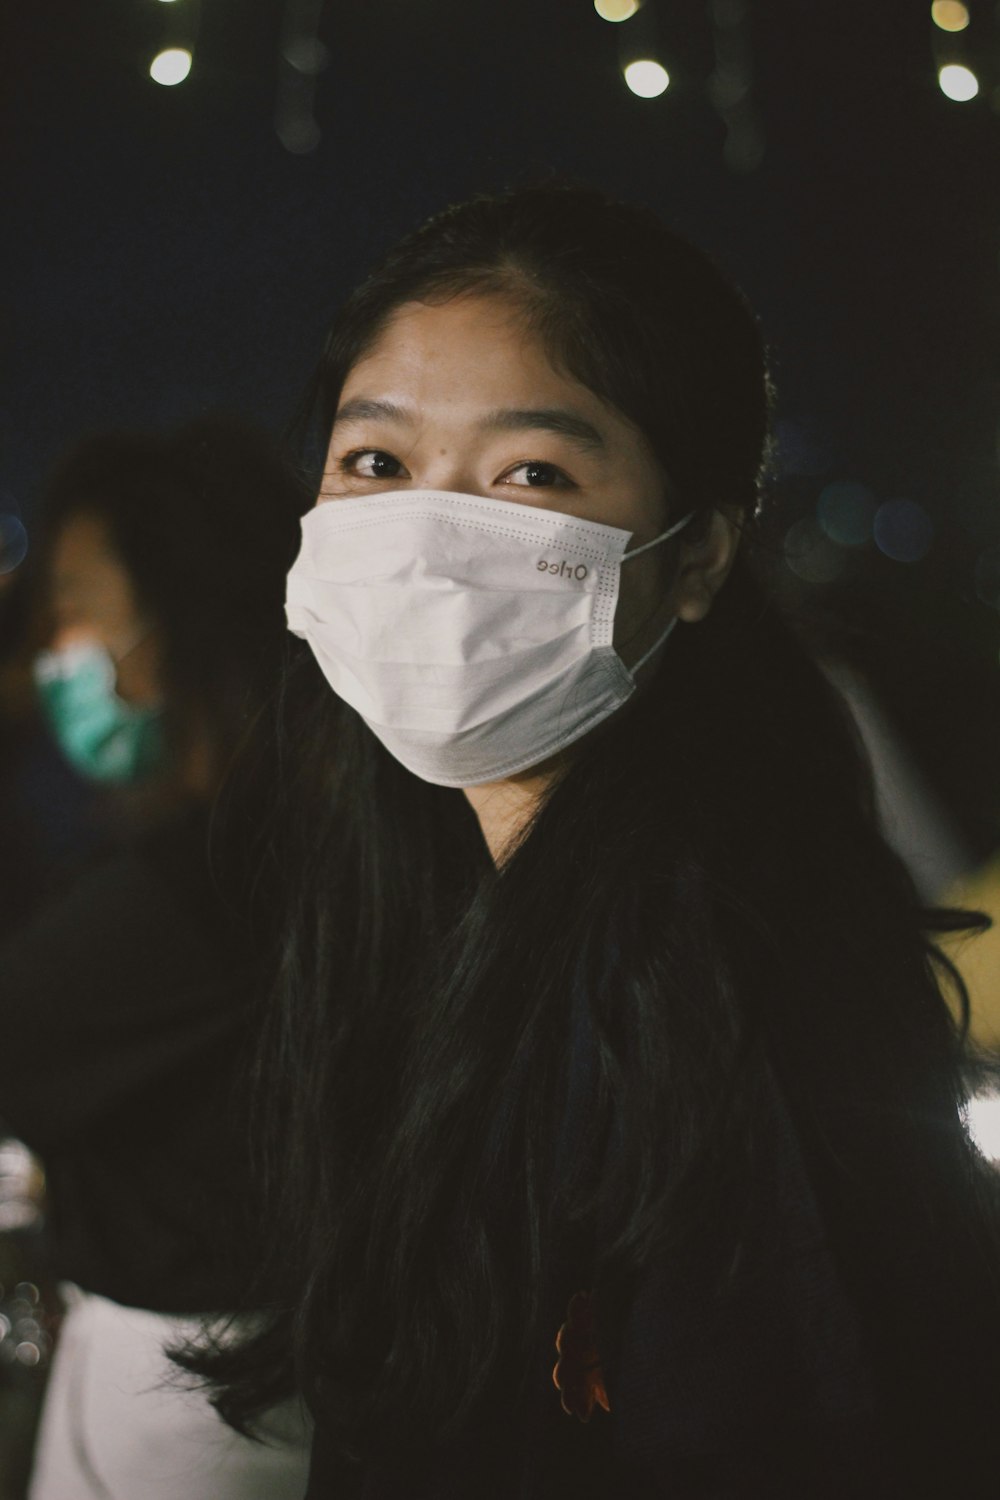 a woman wearing a face mask at night